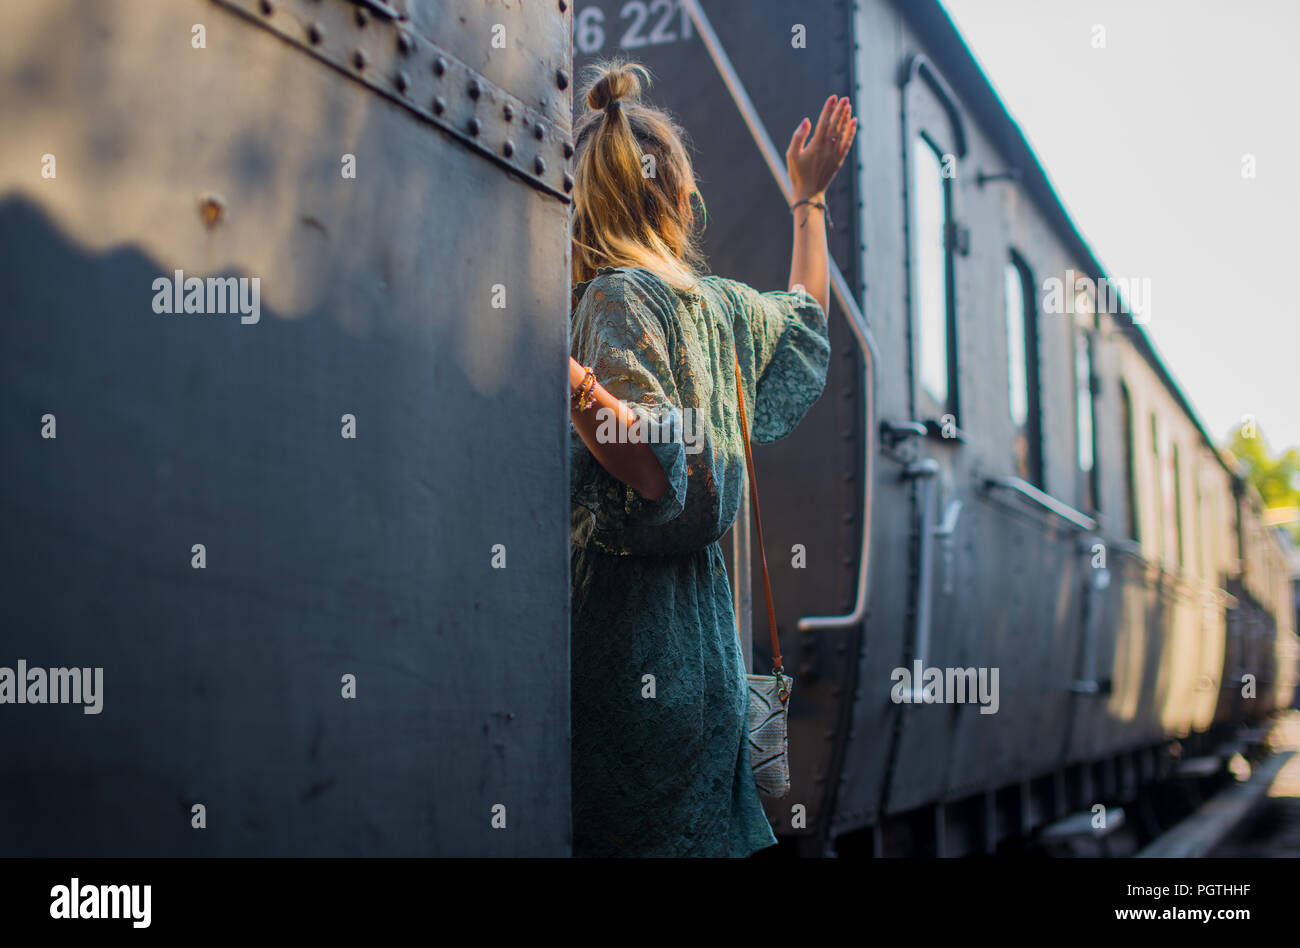 A girl getting on a train and waving goodbye Stock Photo